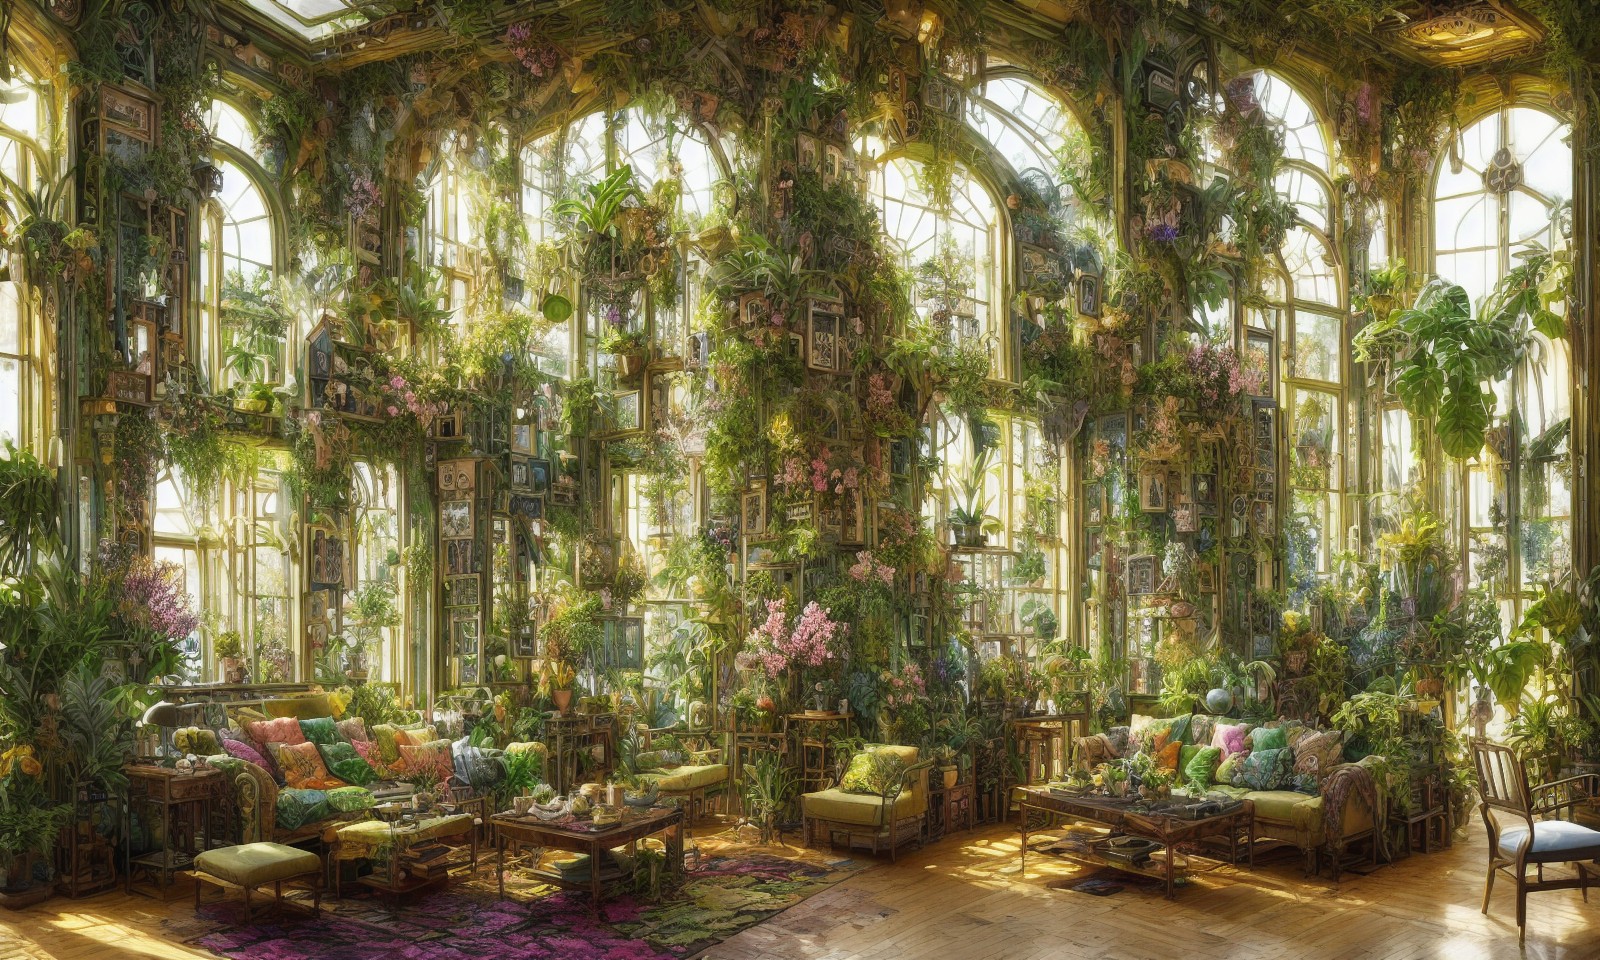 9 images of Conservatory living room full of plants by Stable Diffusion